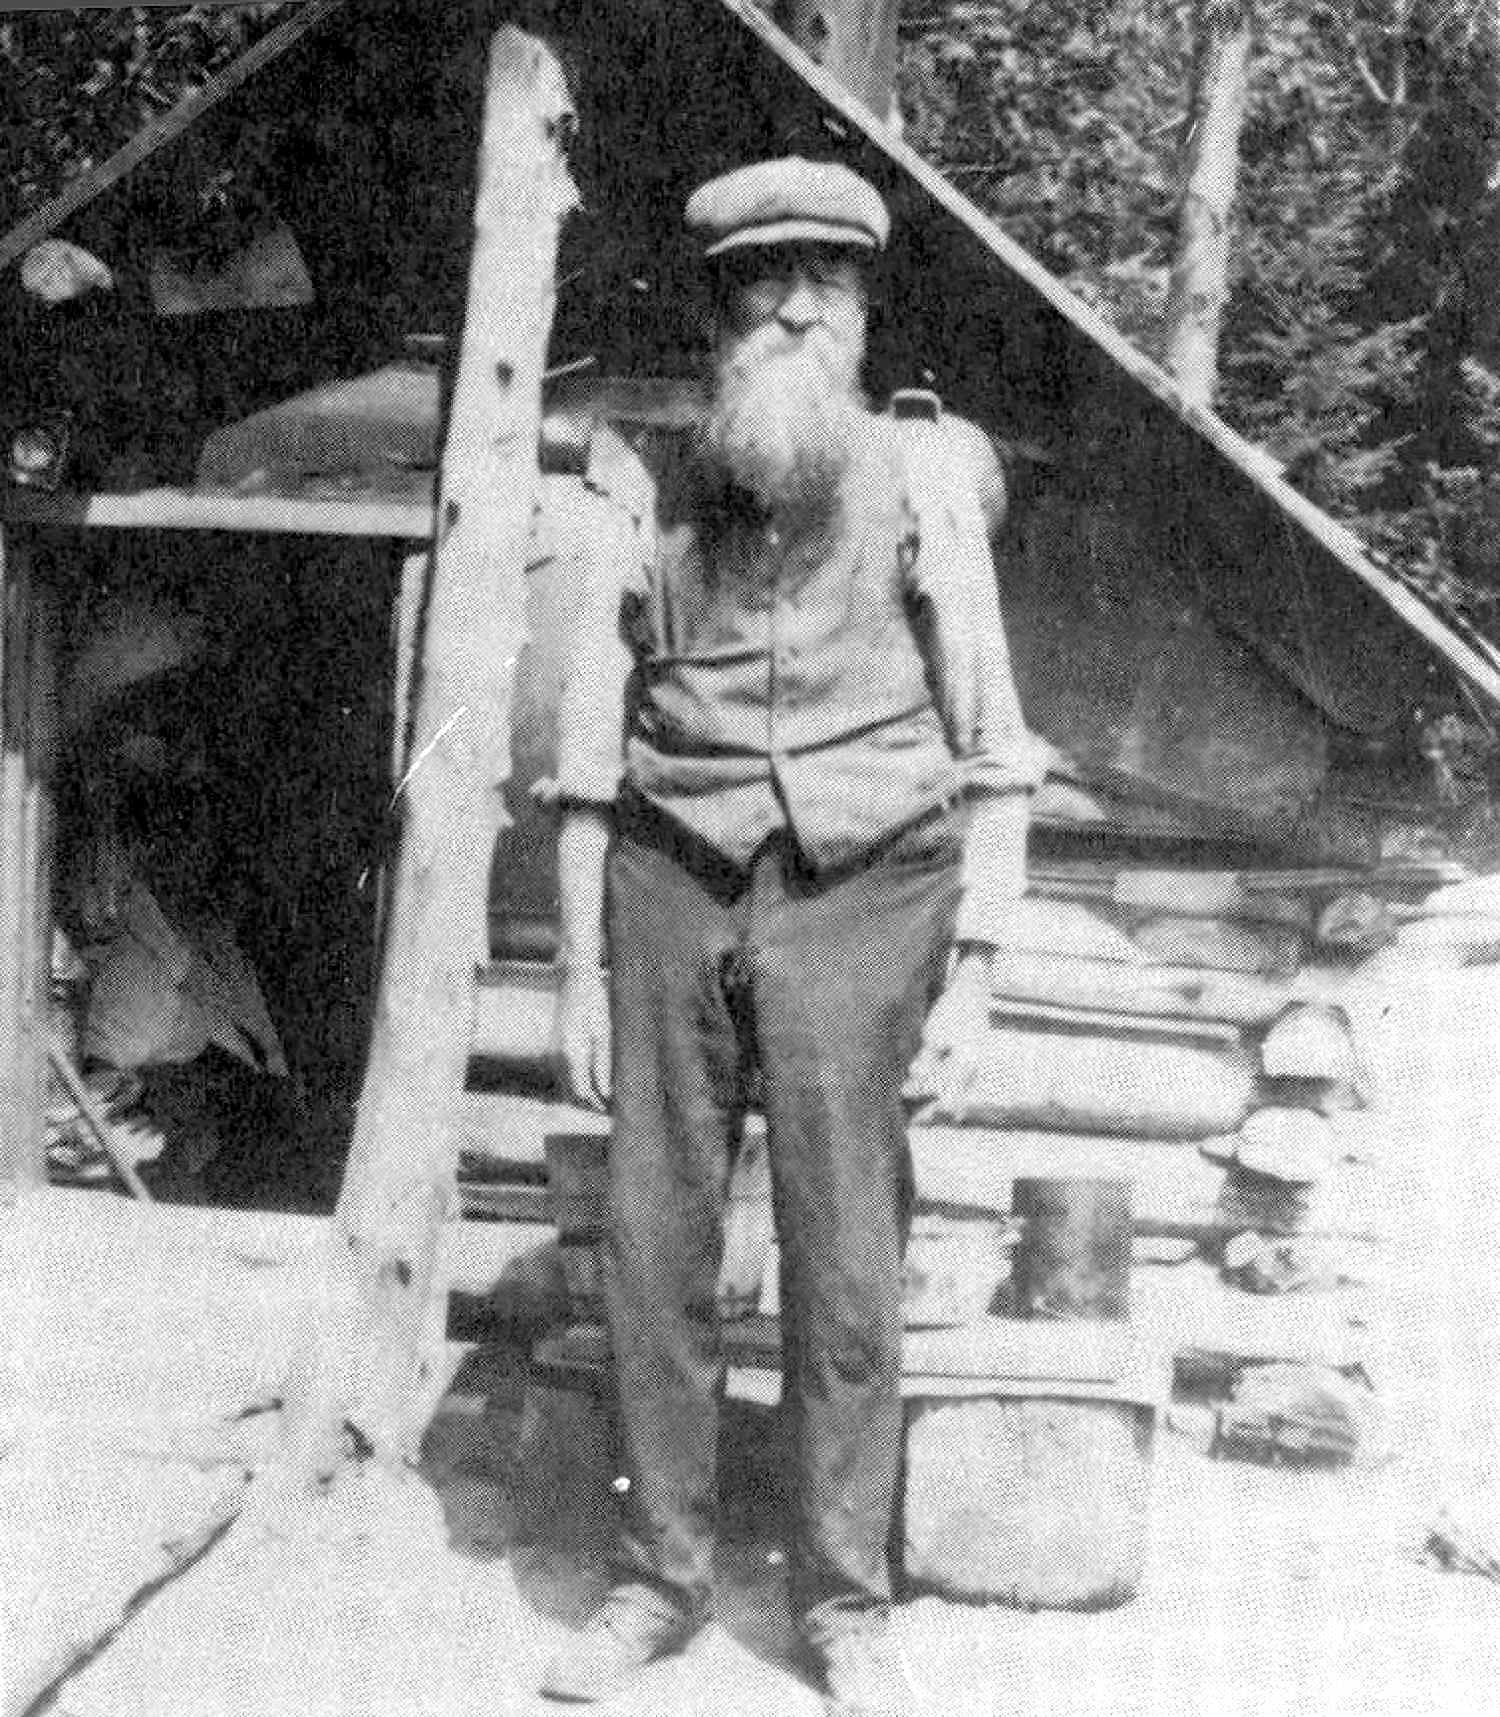 Bruce County Memories – A hermit’s life in Bruce County